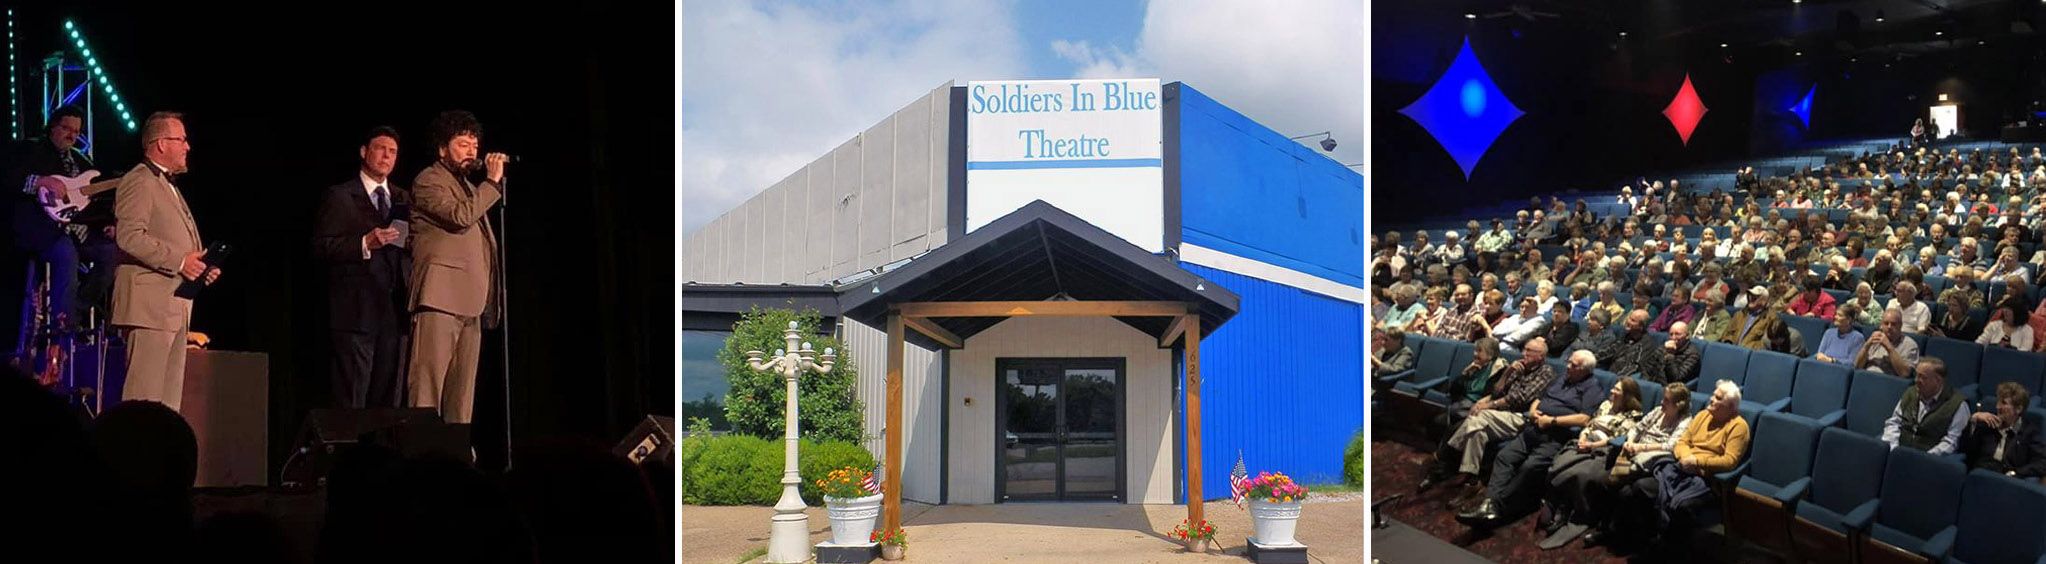 Soldiers in Blue Theatre